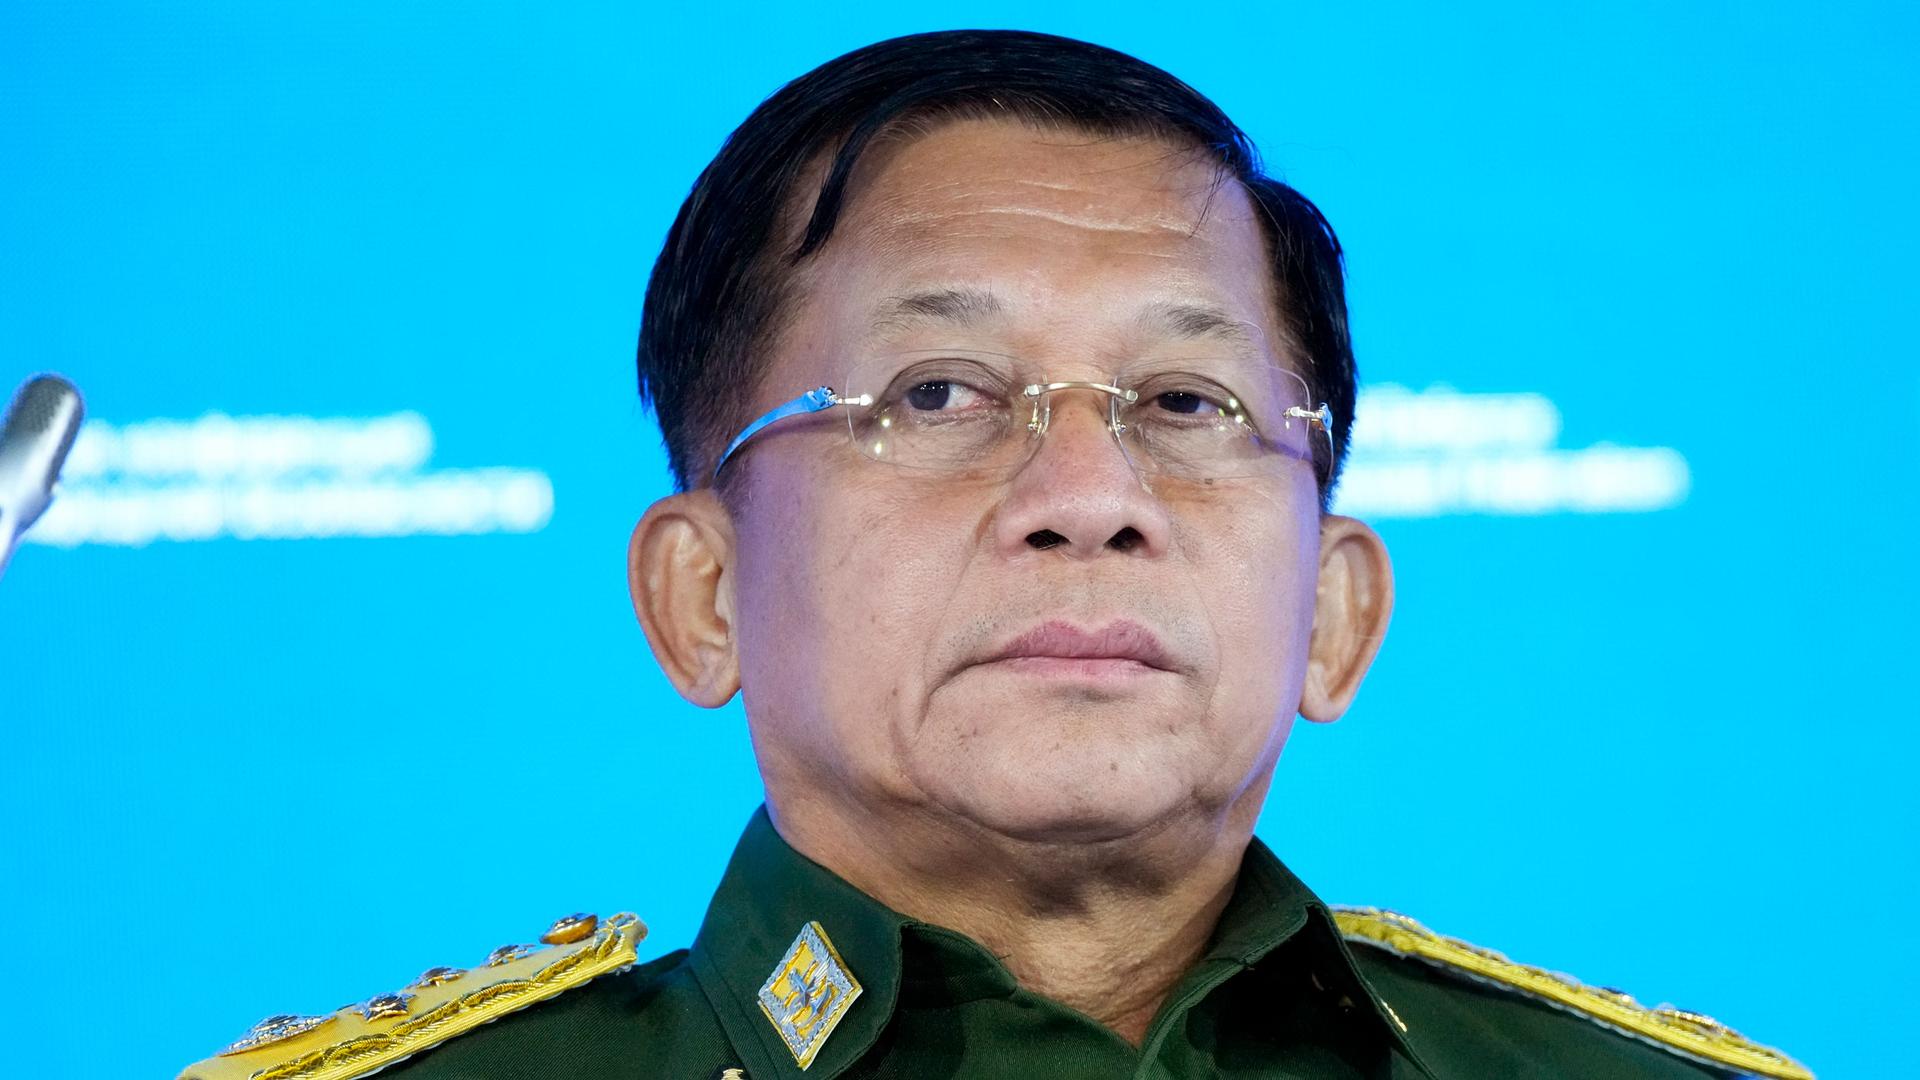 Senior General Min Aung Hlaing is shown wearing glasses and a green military uniform with gold epaulettes.